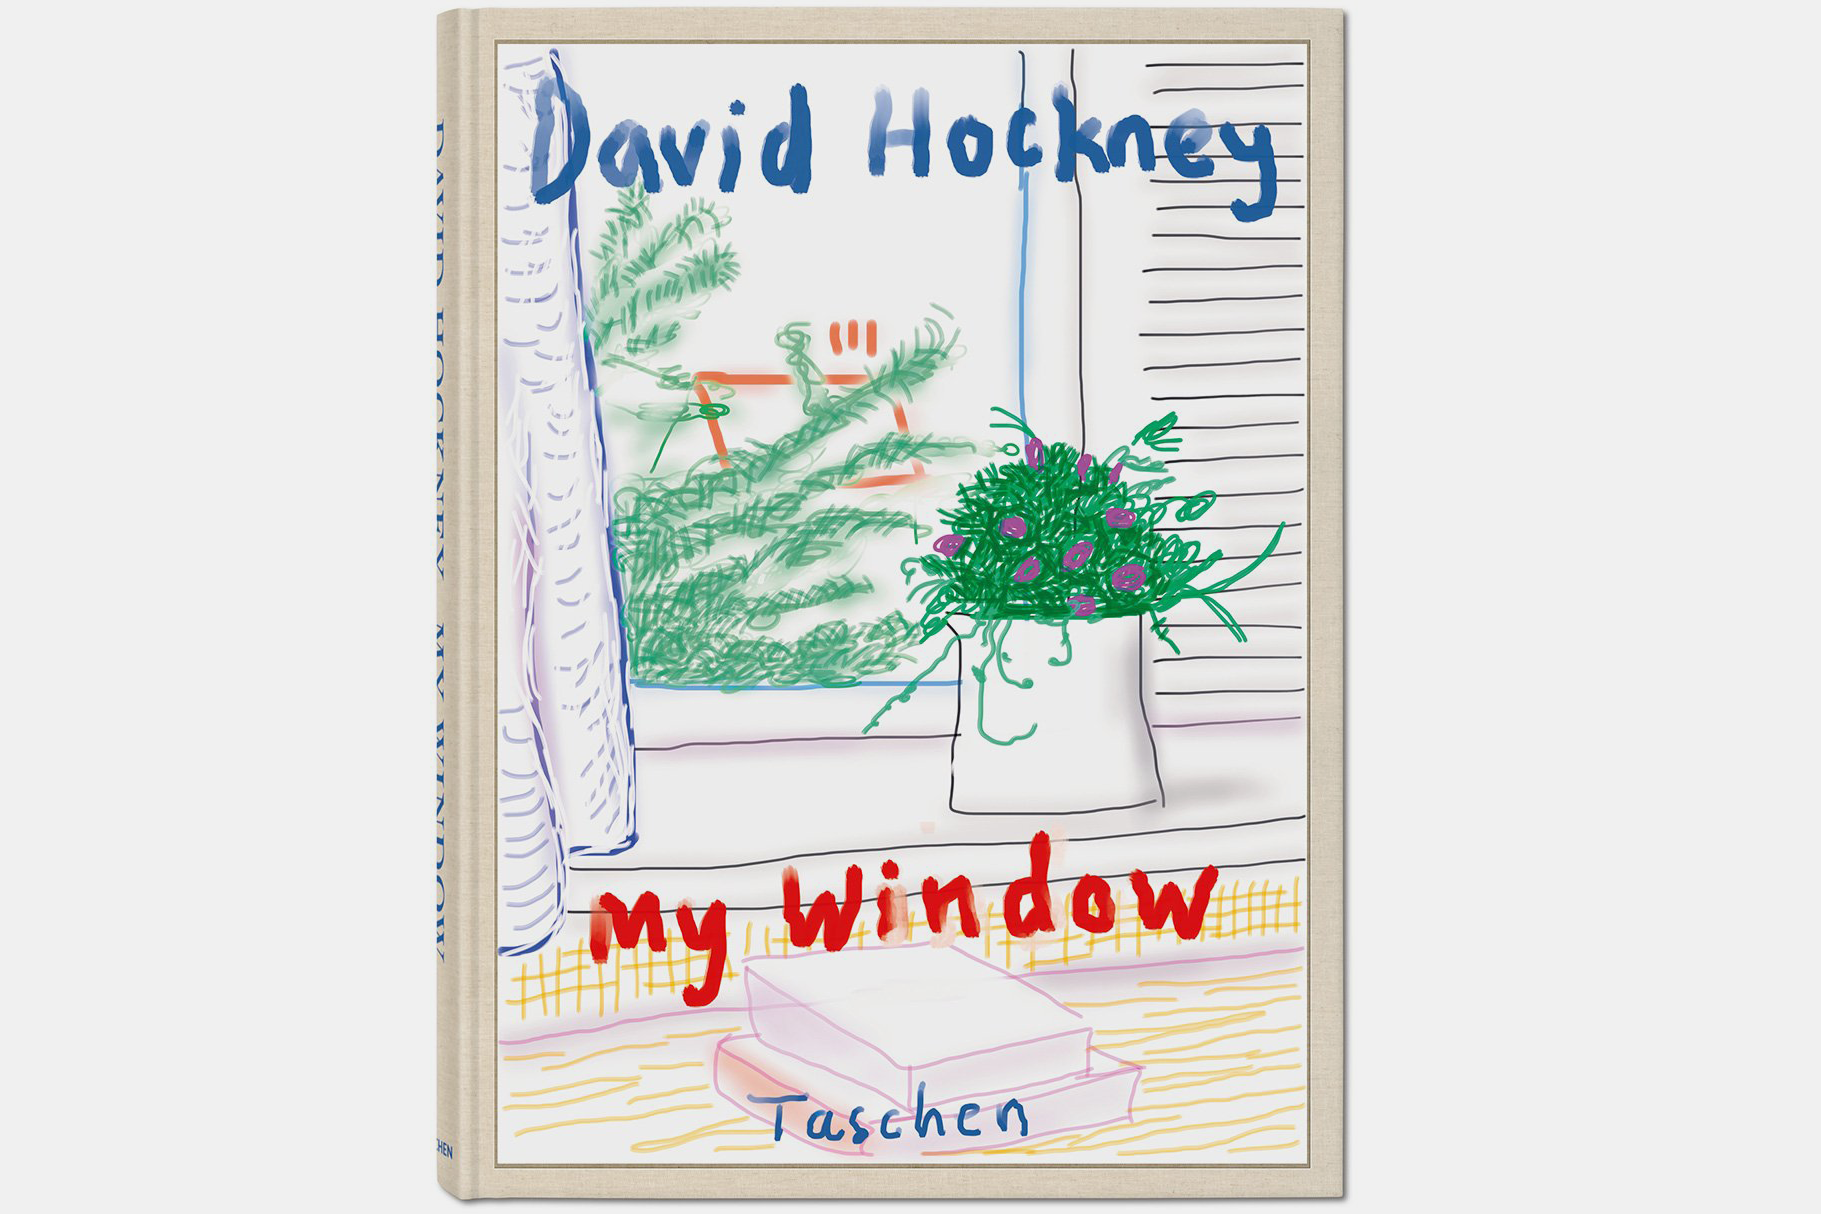 An Affordable Way to Own a Rare Work by David Hockney